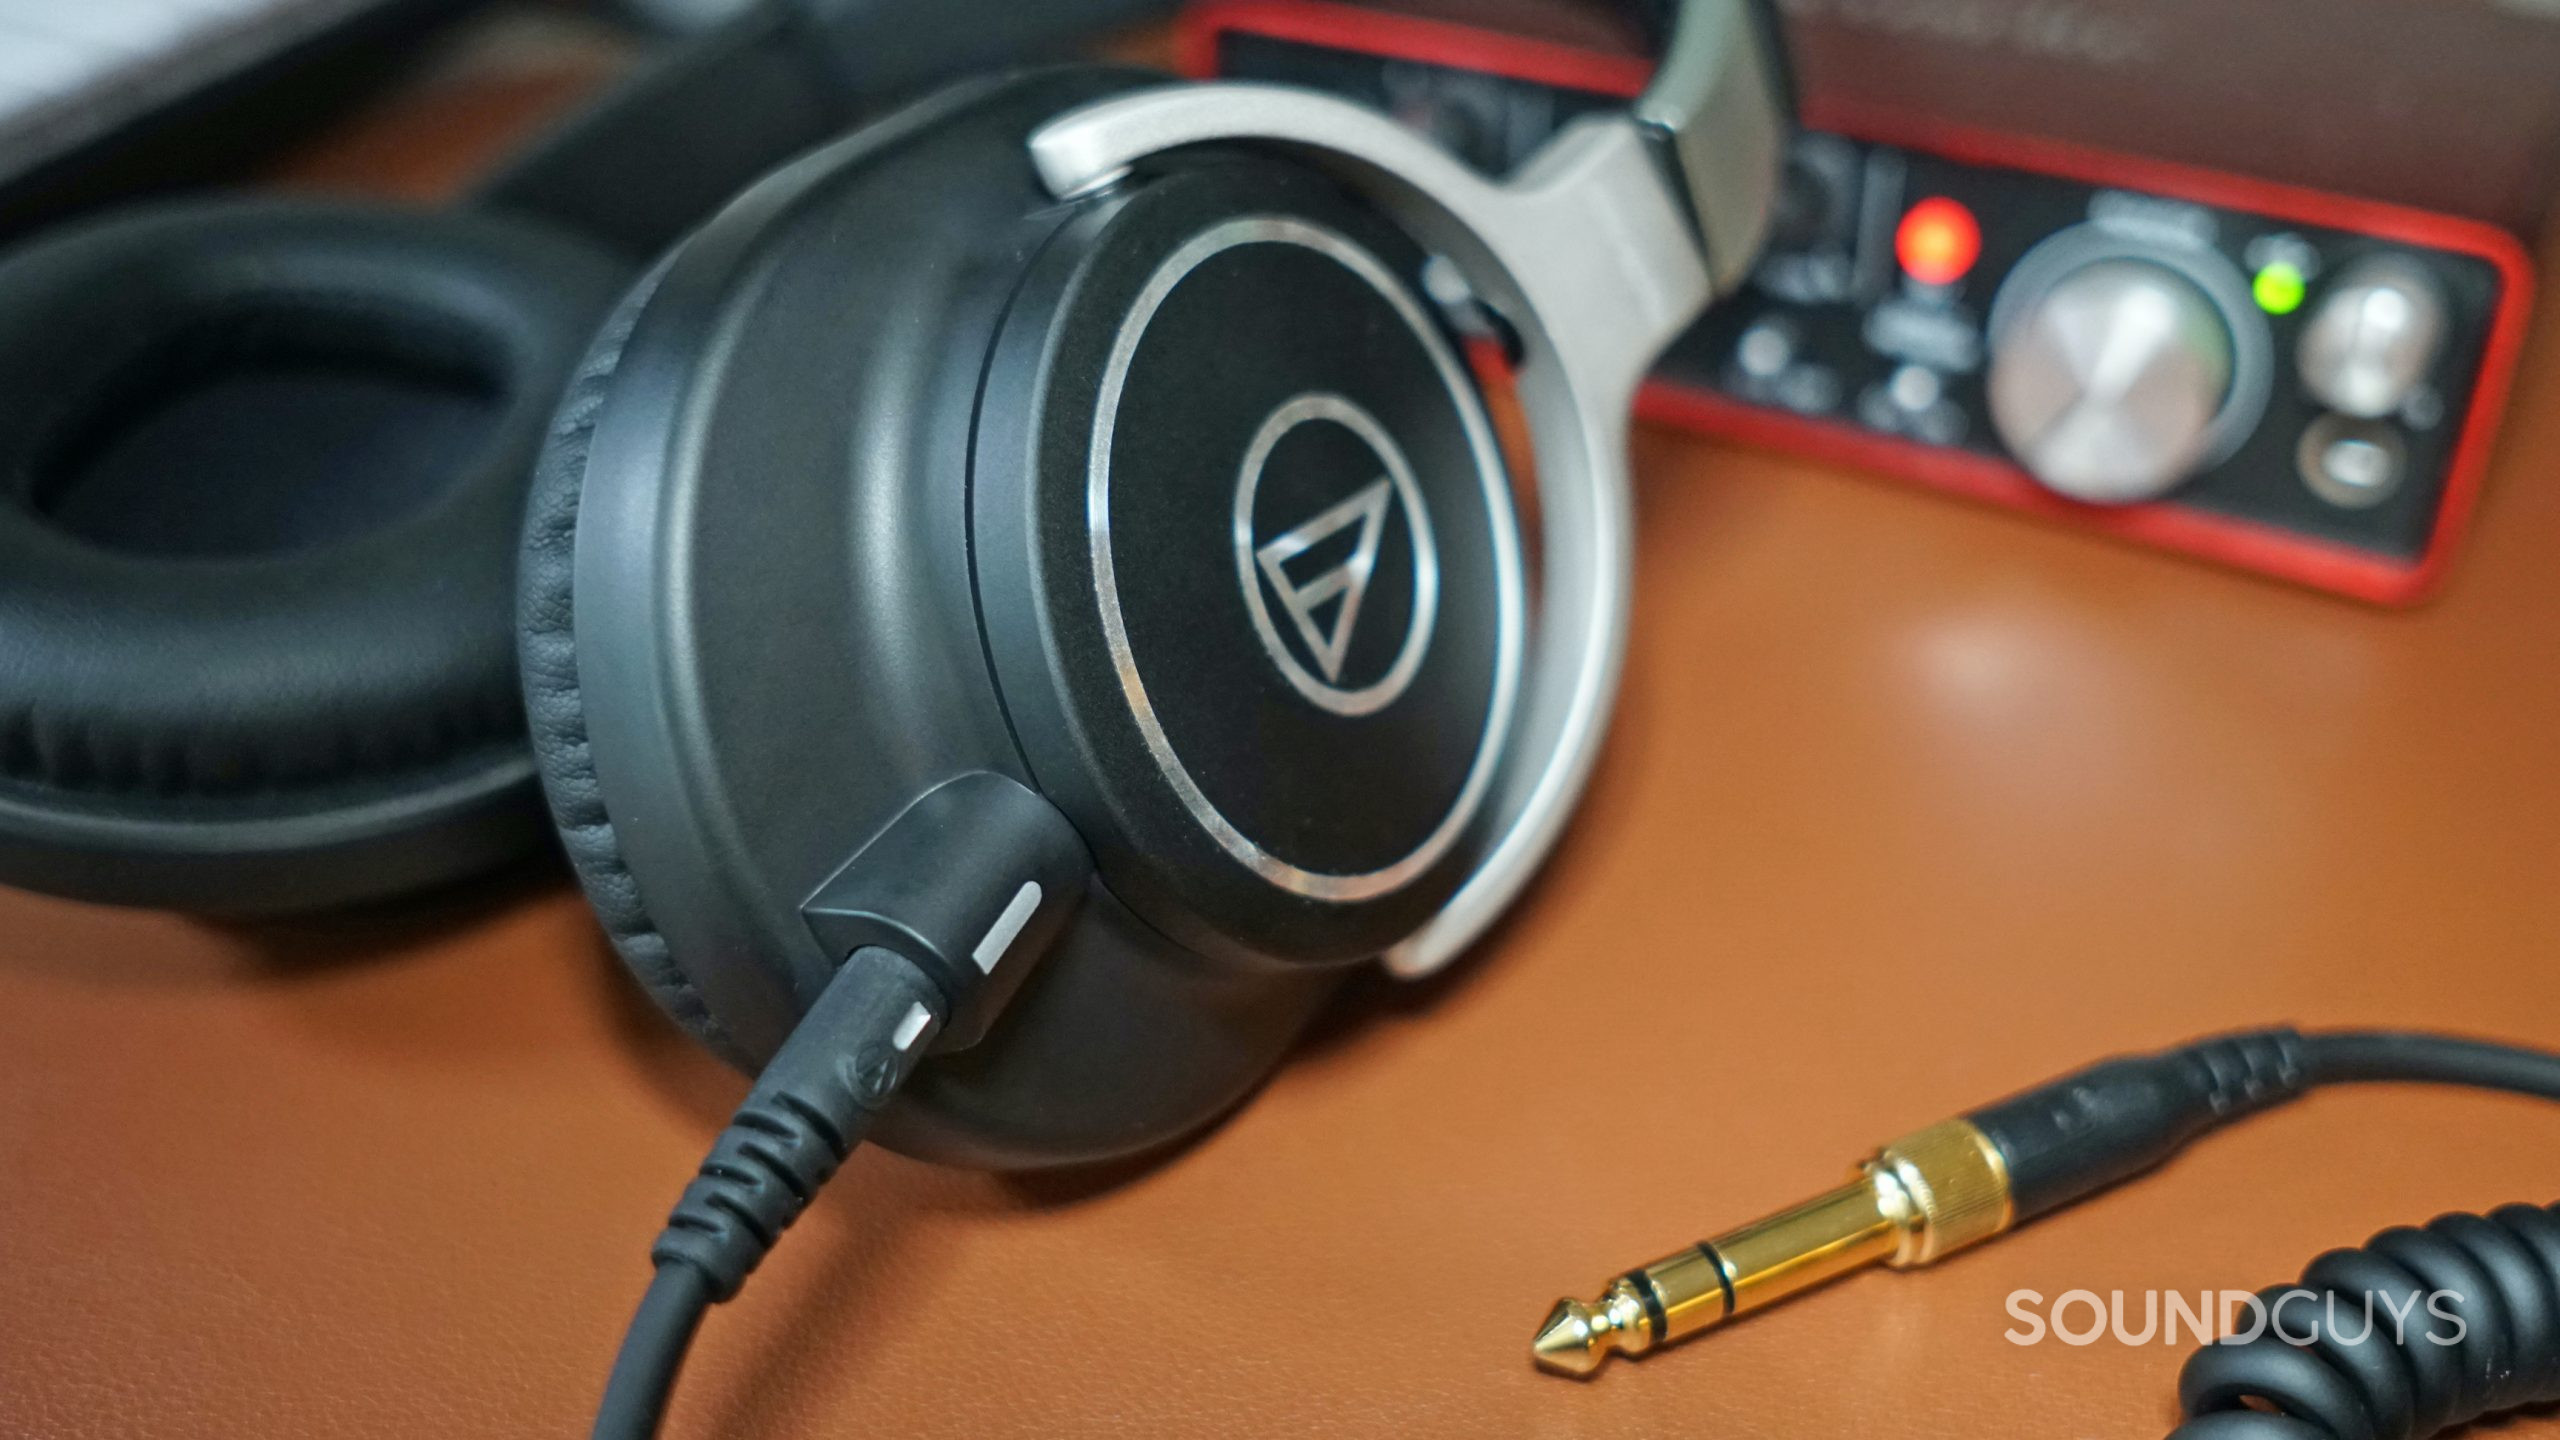 The Audio-Technica ATH-M70x lays on a leather surface in front of a Focusrite Scarlett 2i2, with its 1/4 inch plug on the table.